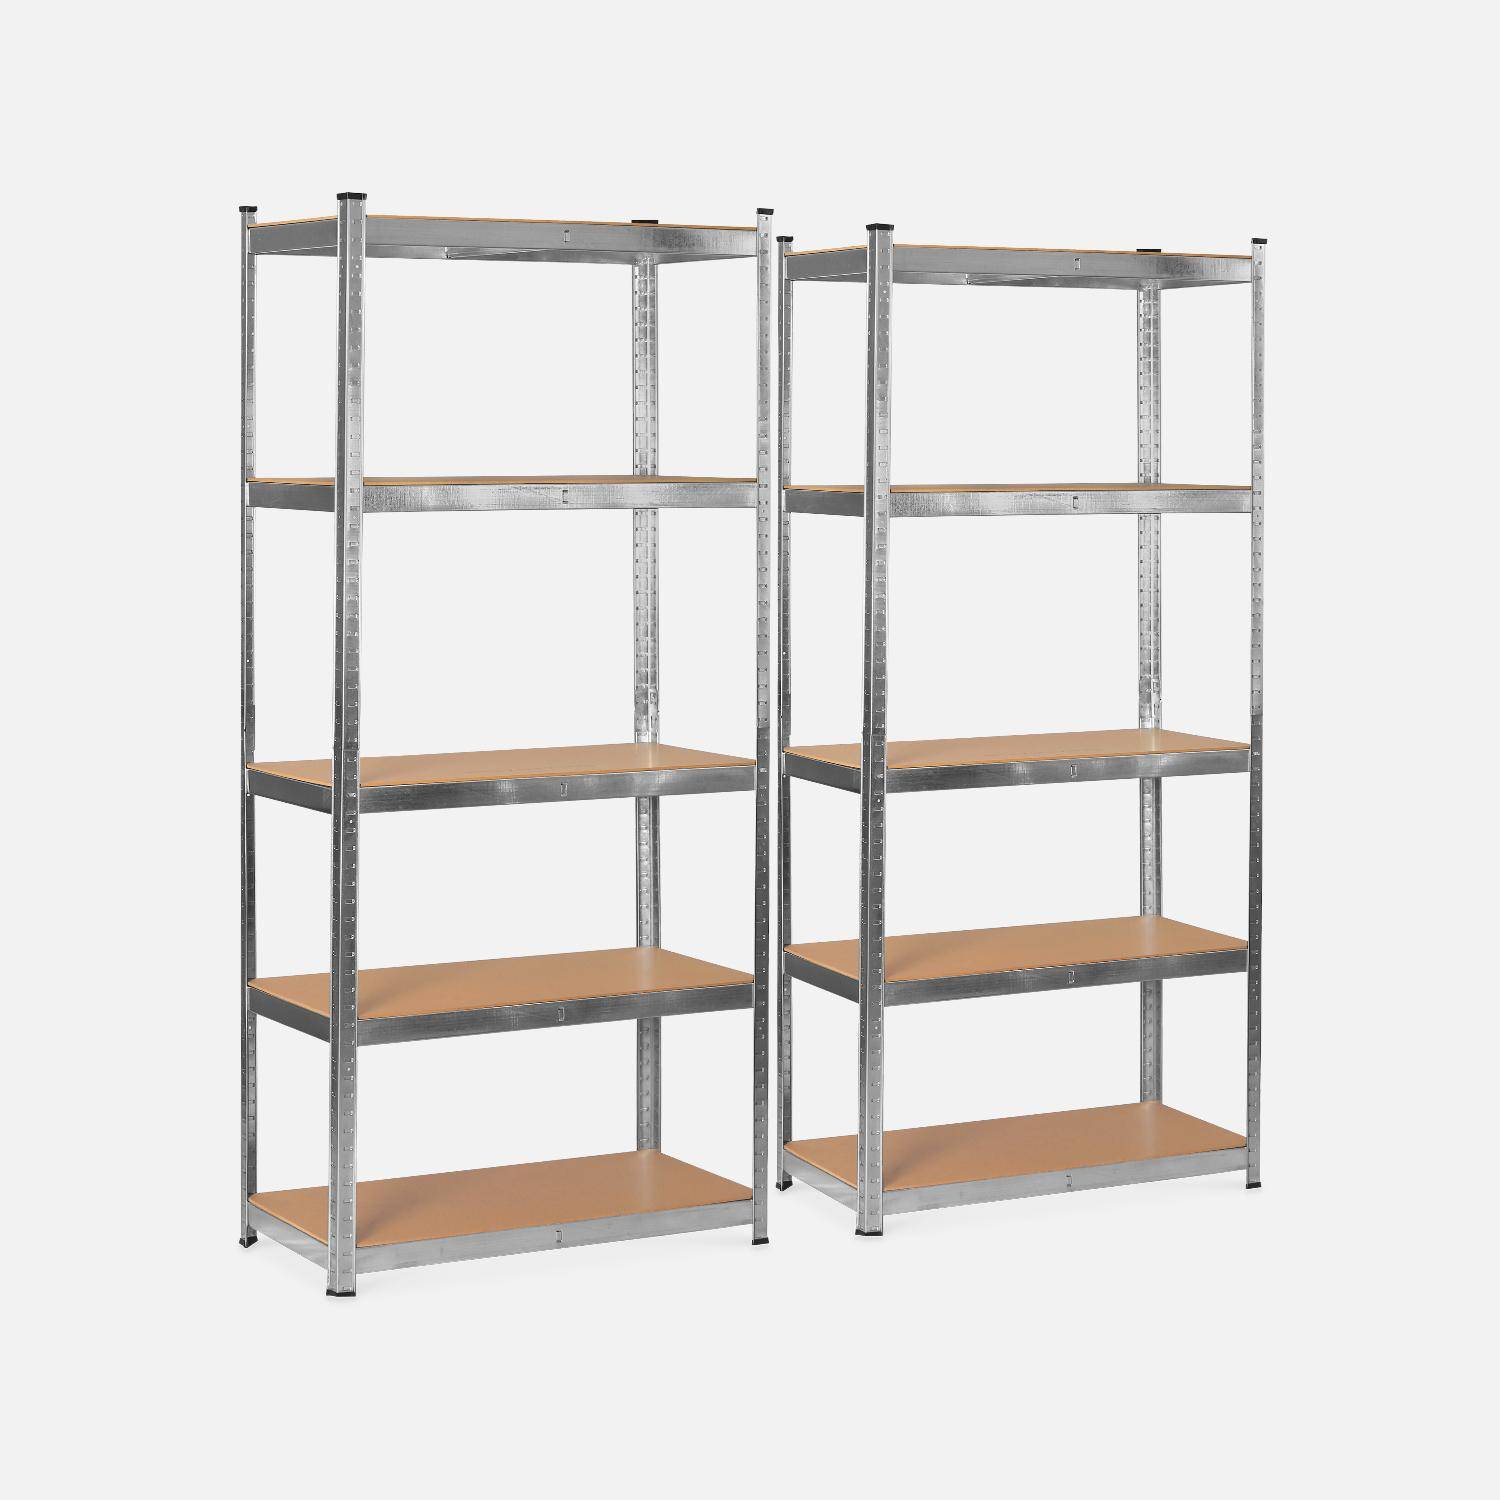 Set of 2 modular metal shelves for heavy loads - Modul - with 5 trays Photo1